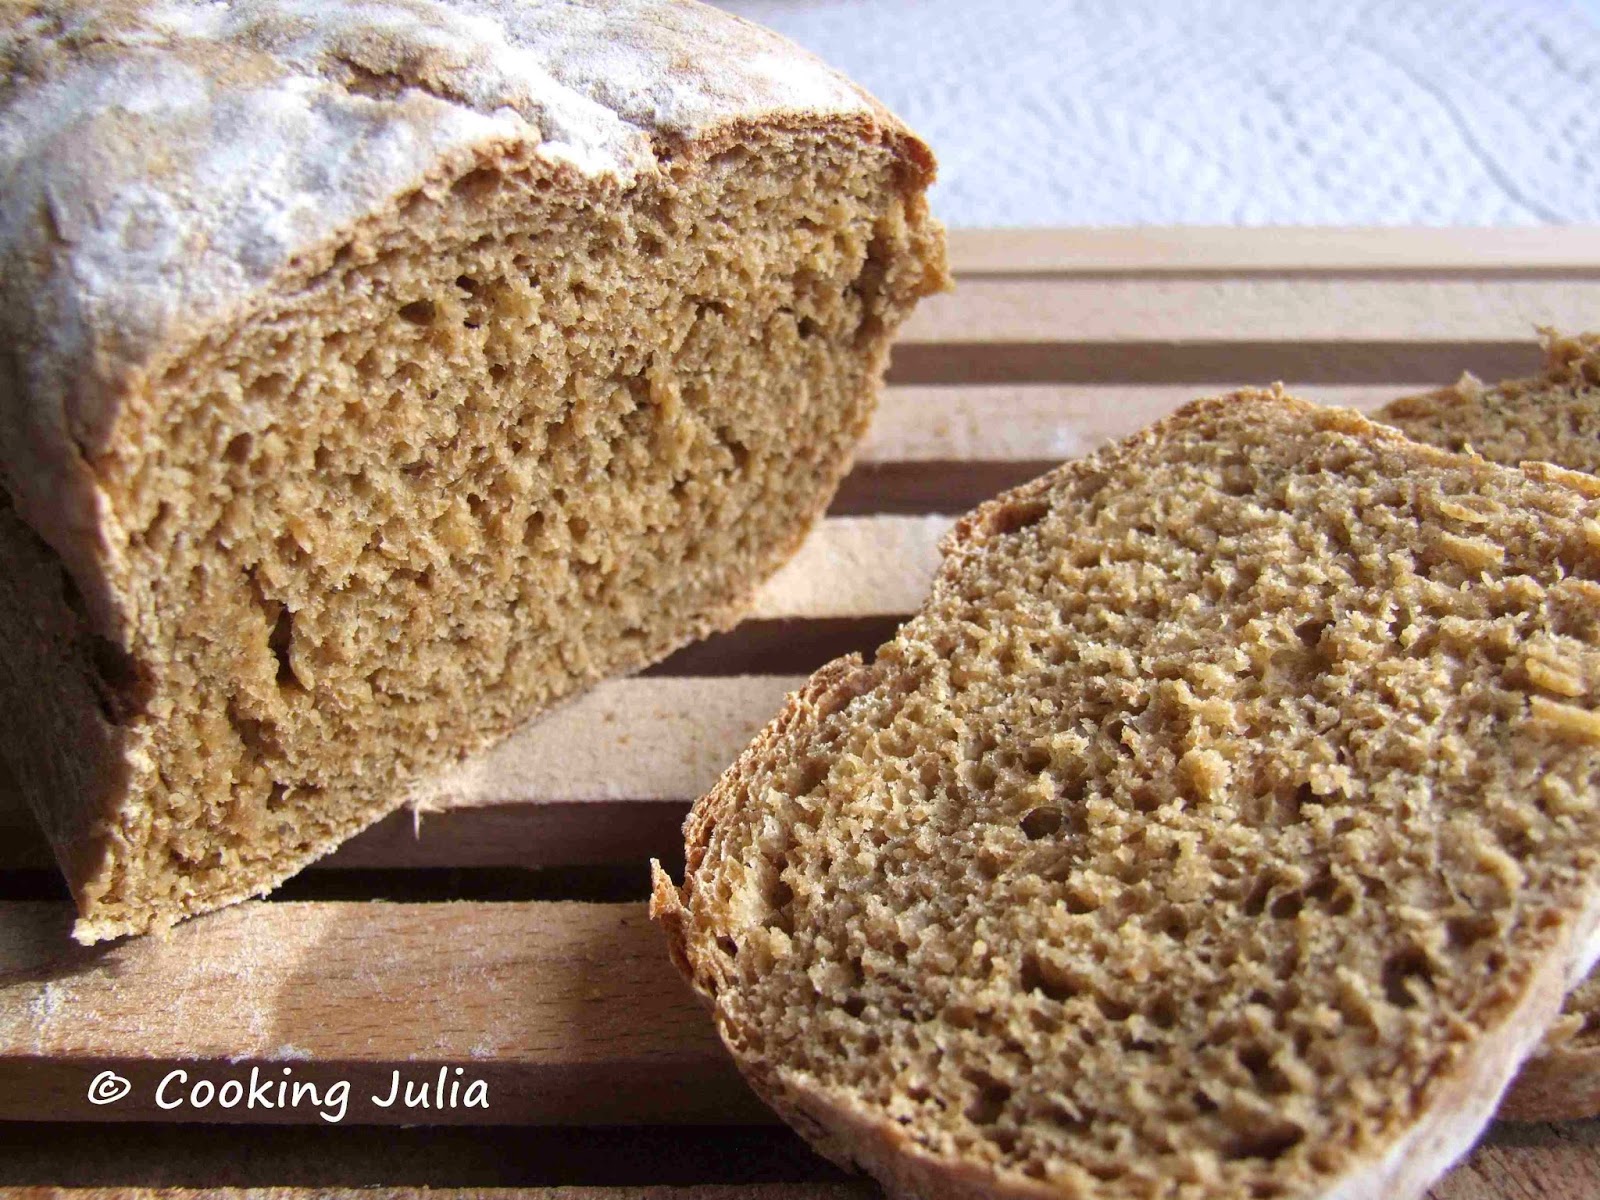 COOKING JULIA : PAIN COMPLET ULTRA-MOELLEUX